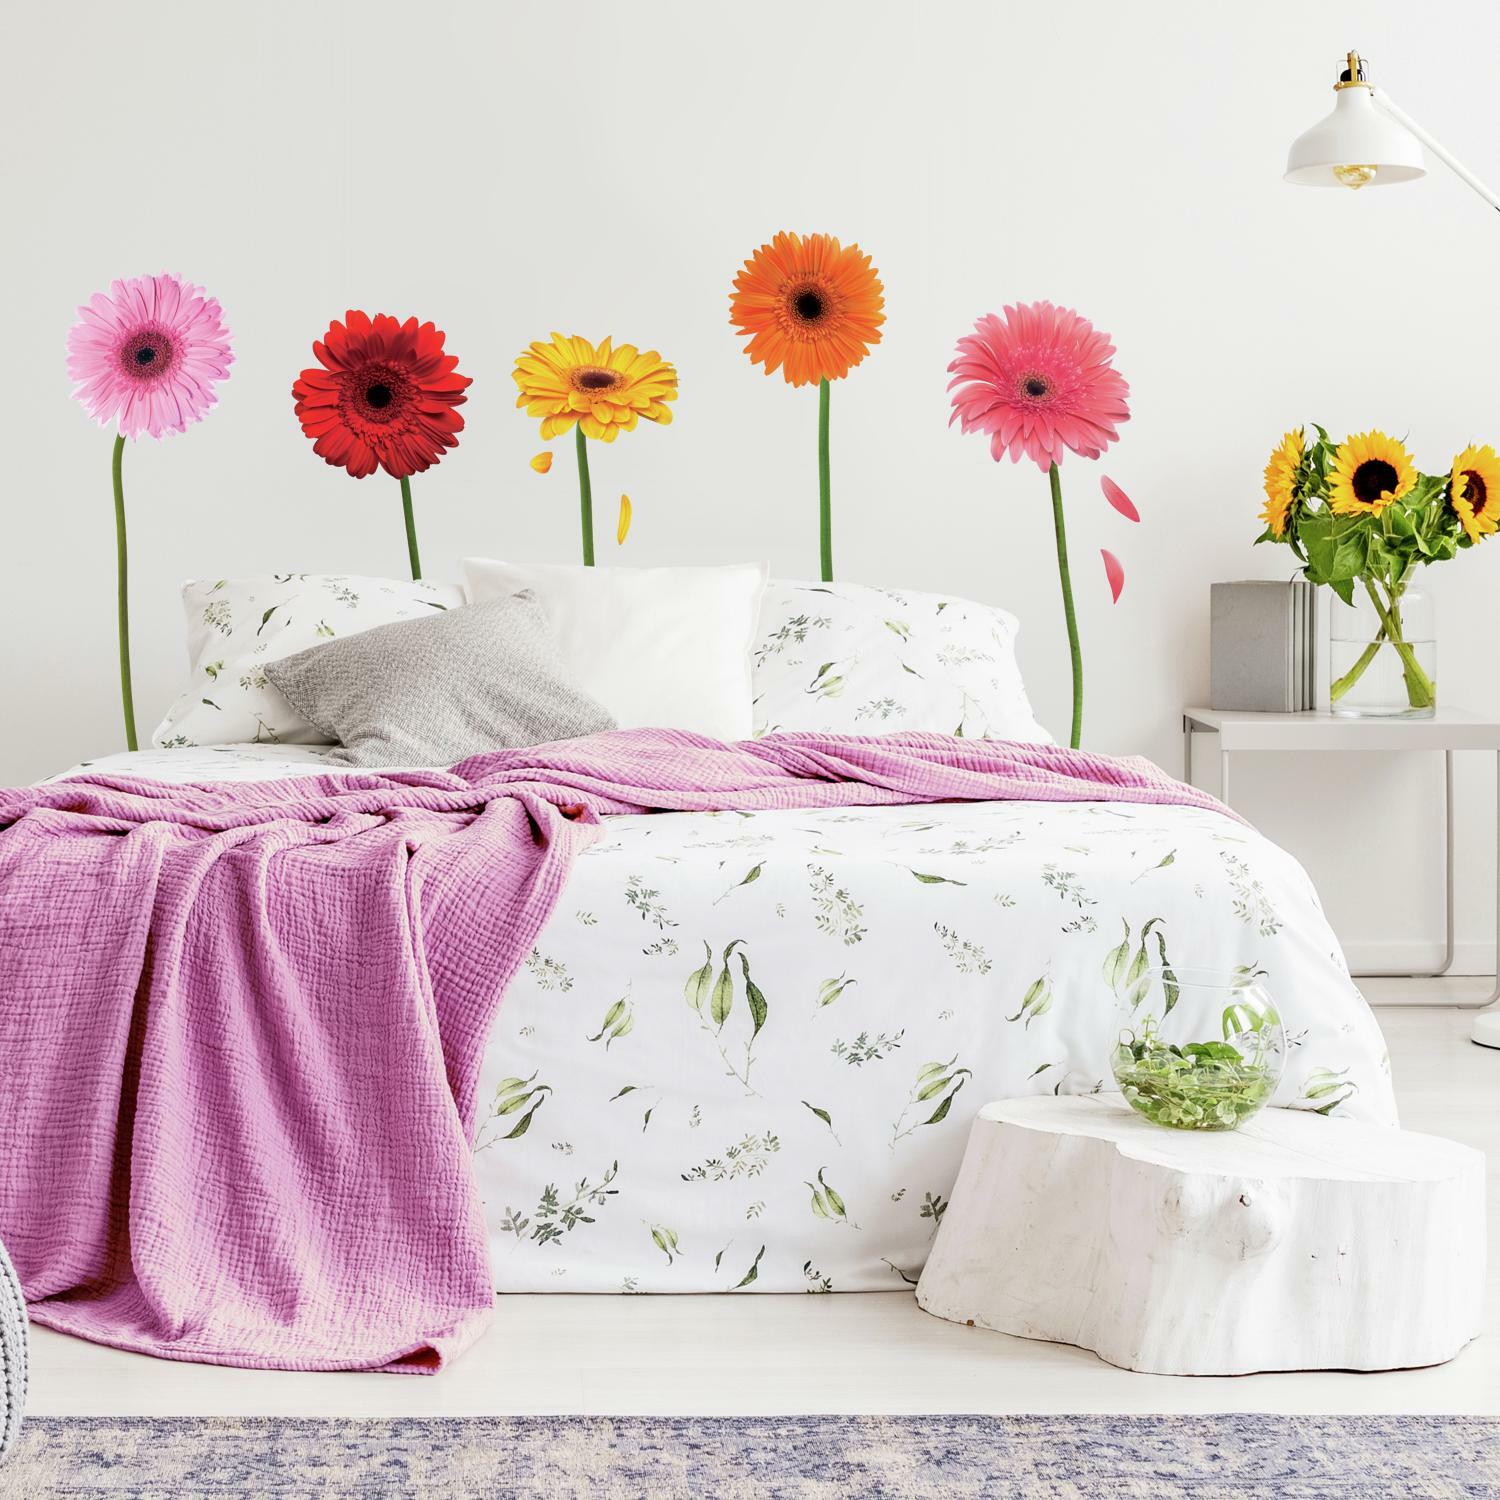 A decale with tall-stemmed Gerber daisies in pink red, yellow, and orange serves as a headboard for a bed with a pink blanket and floral bedding. An end table the color of driftwood holds a vase filled with sunflowers.